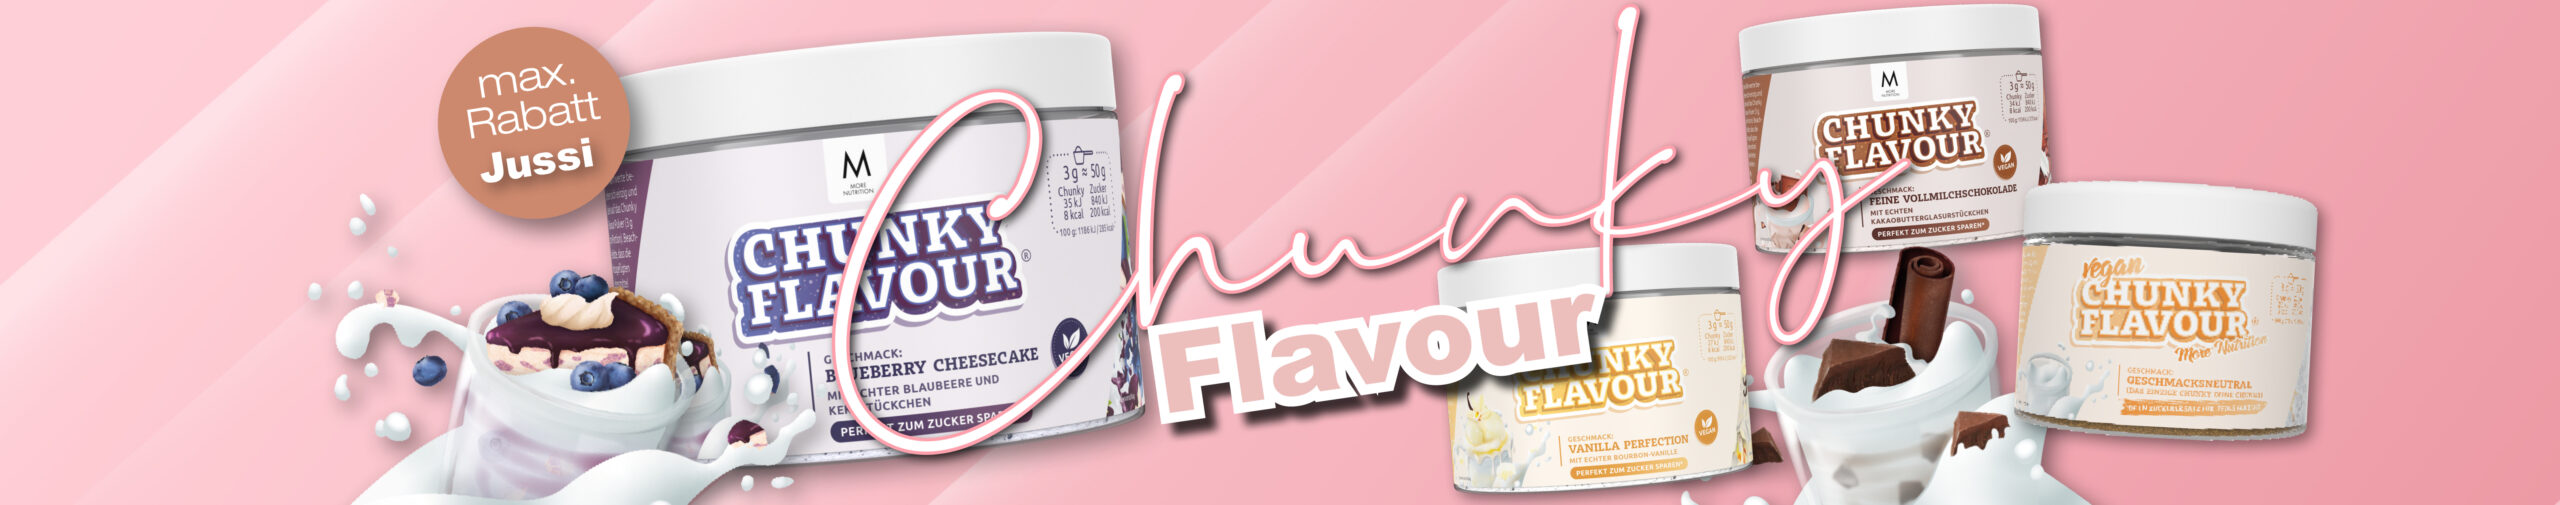 Chunky Flavour Banner_1540x300